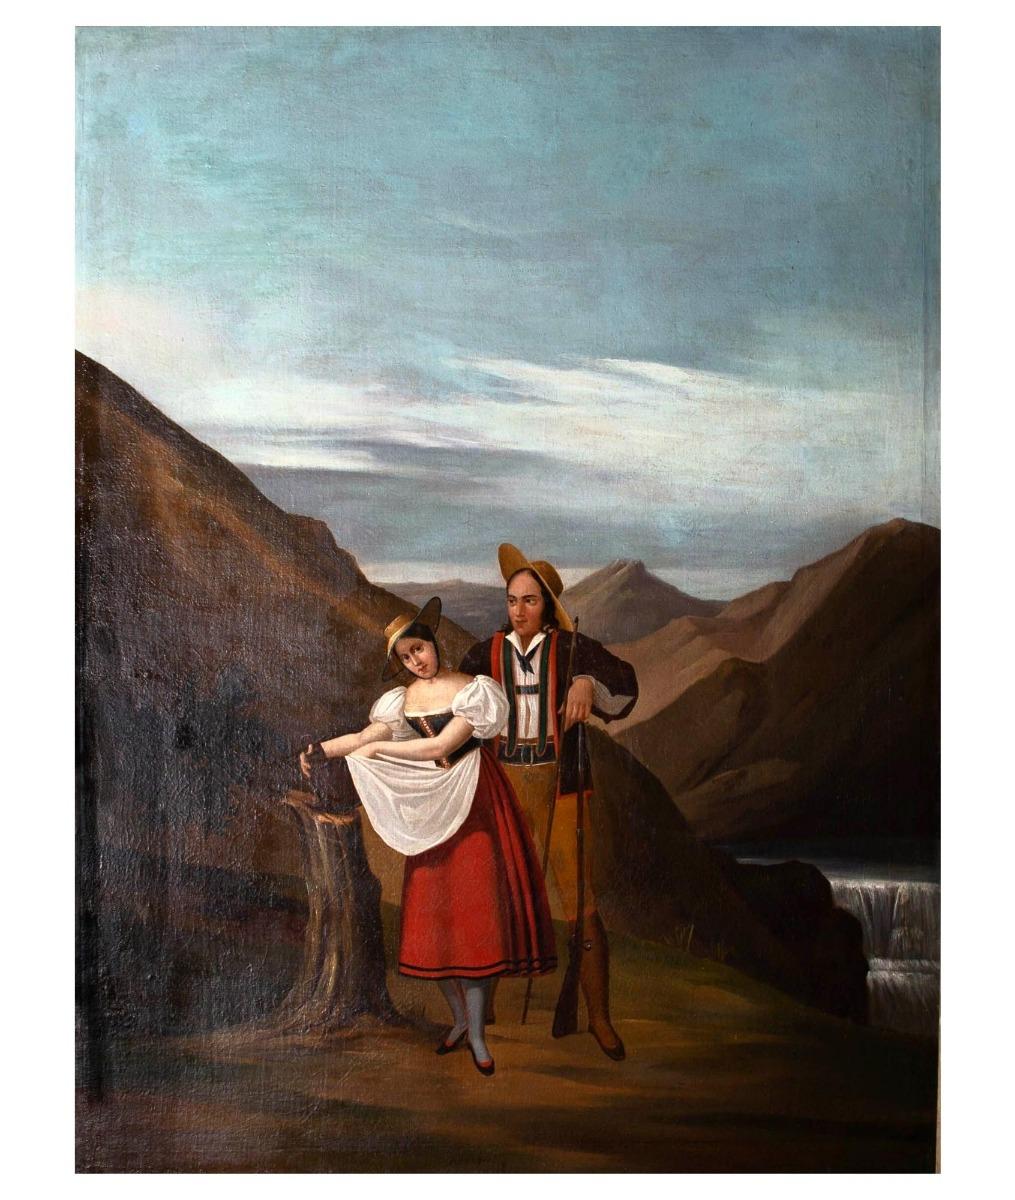 A truly unique and engaging piece of European Folk Art from the mid 19th Century. This vibrant and crisp scene shows two smartly dressed peasants standing in an expansive, beautiful Swiss mountain landscape. The man wears lederhosen and is leaning